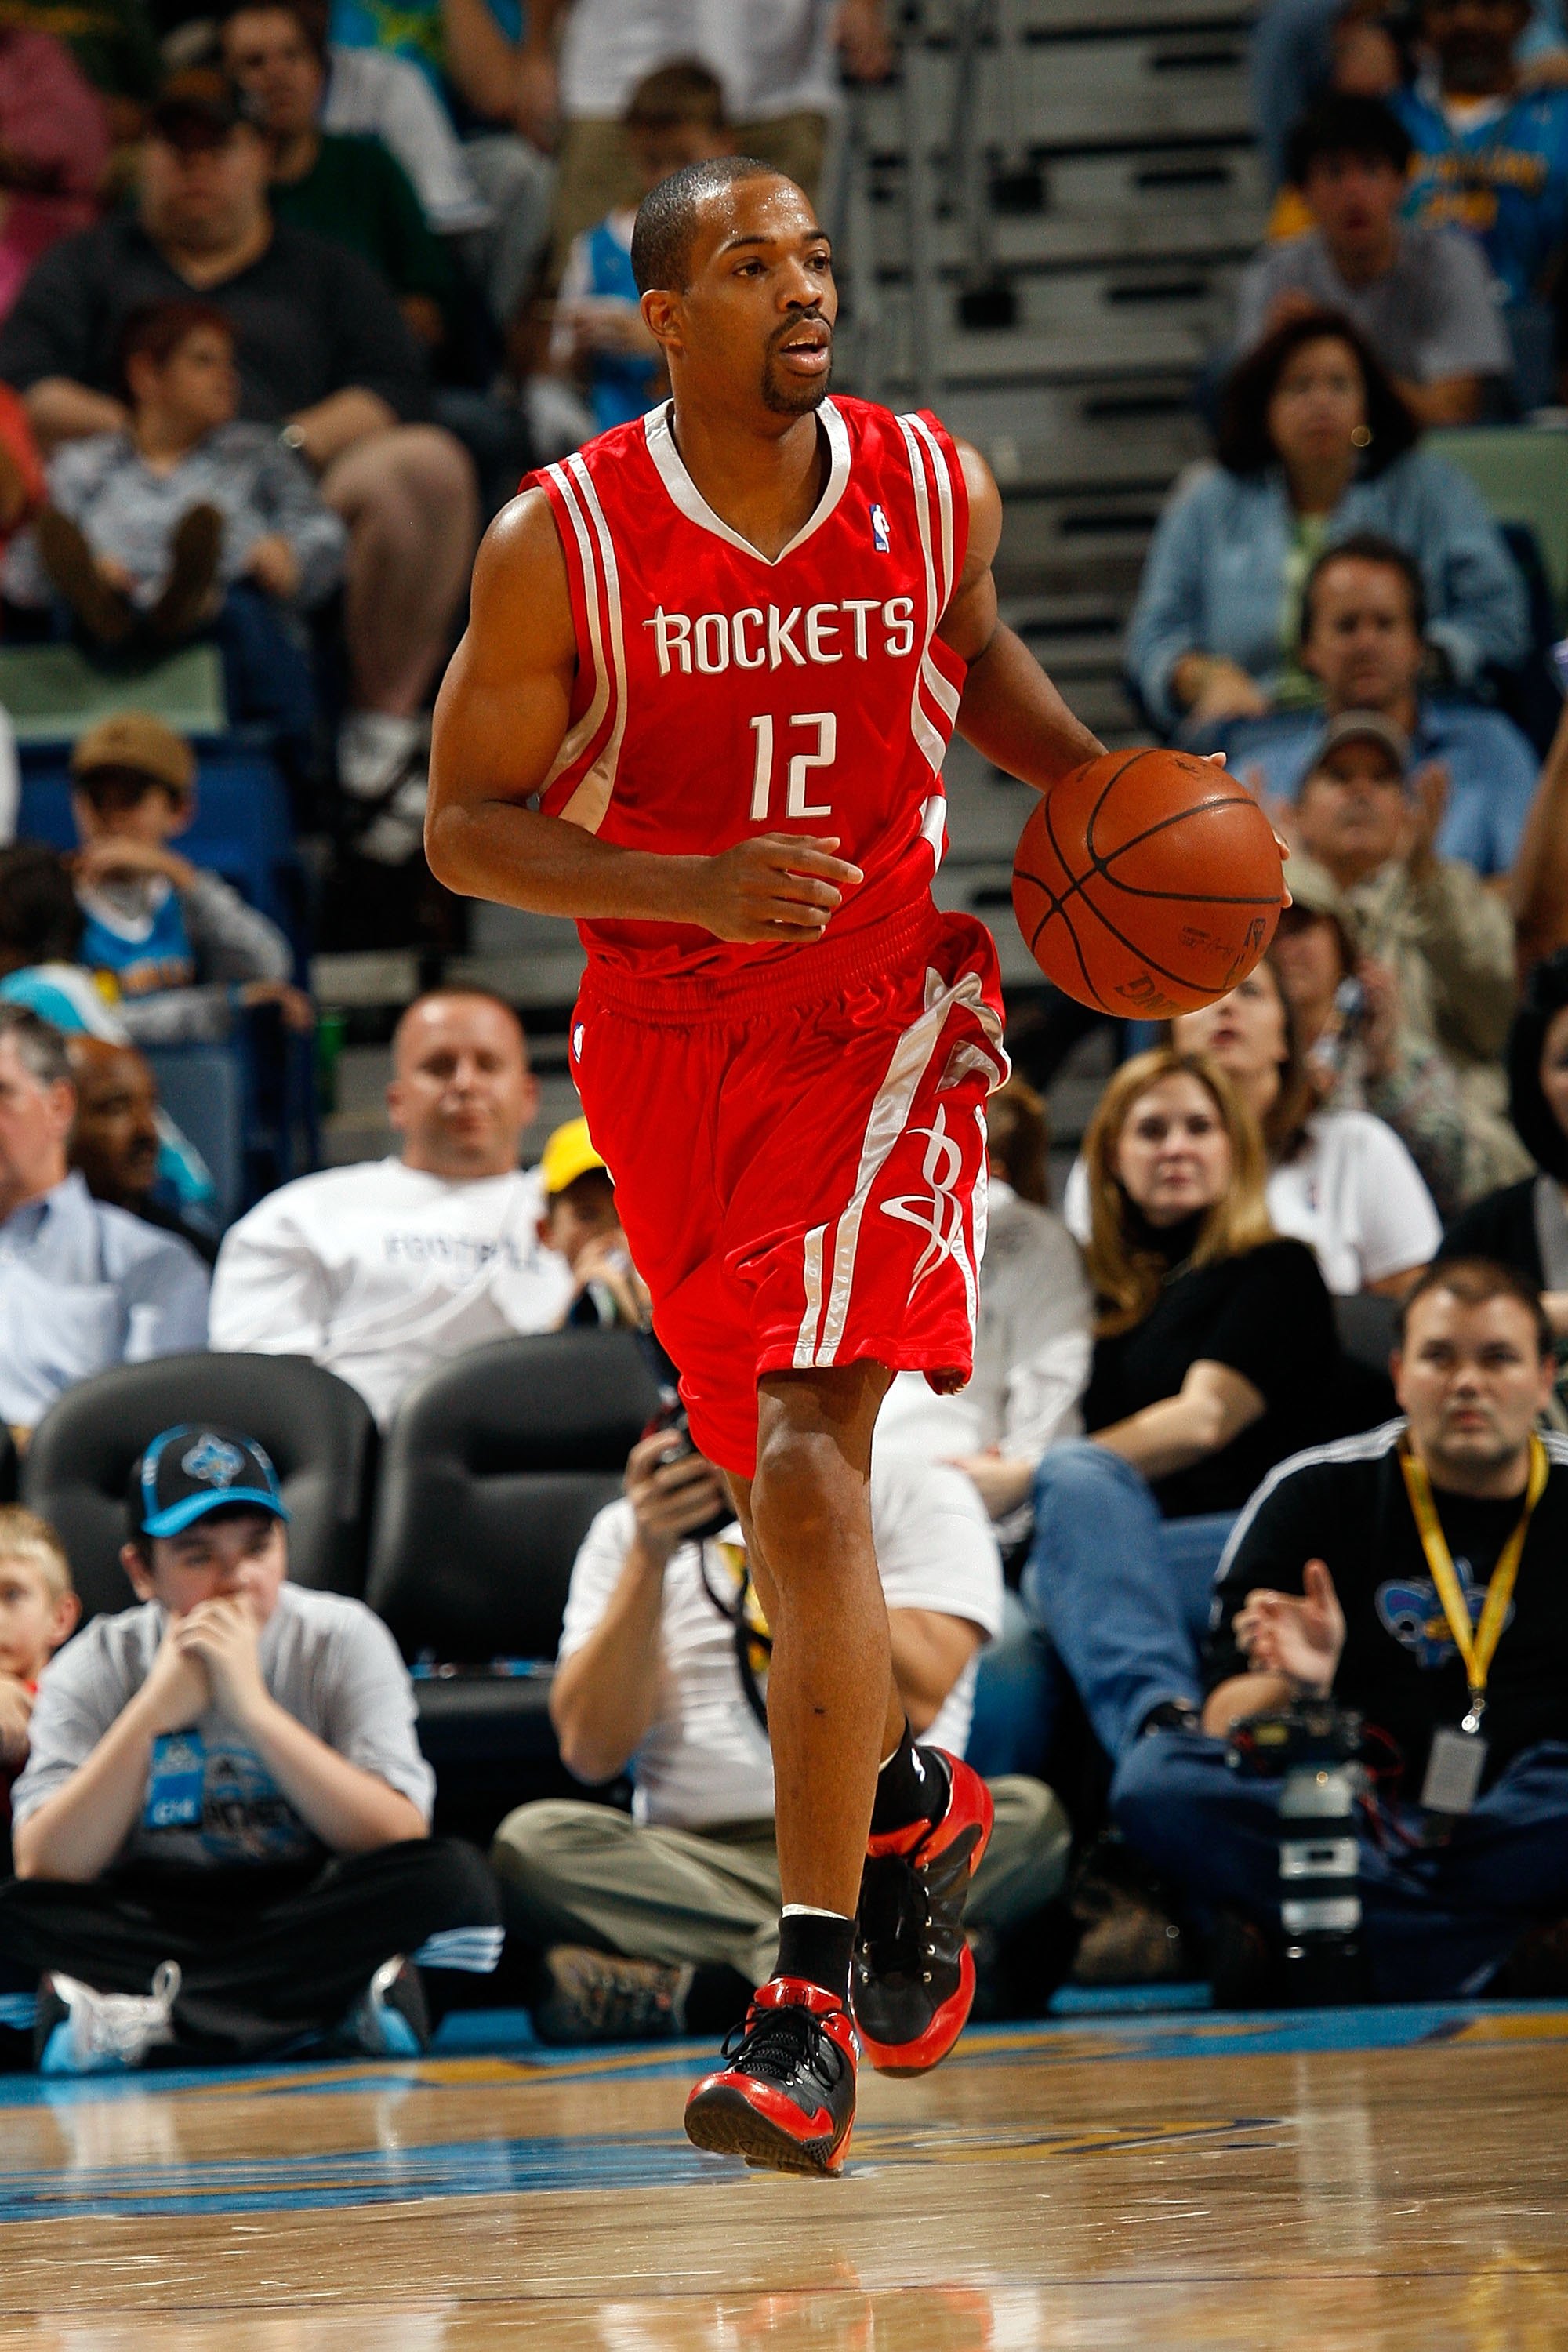 NEW ORLEANS - DECEMBER 26:  Rafer Alston #12 of the Houston Rockets dribbles the ball during the game against the New Orleans Hornets on December 26, 2008 at the New Orleans Arena in New Orleans, Louisiana.  NOTE TO USER: User expressly acknowledges and a